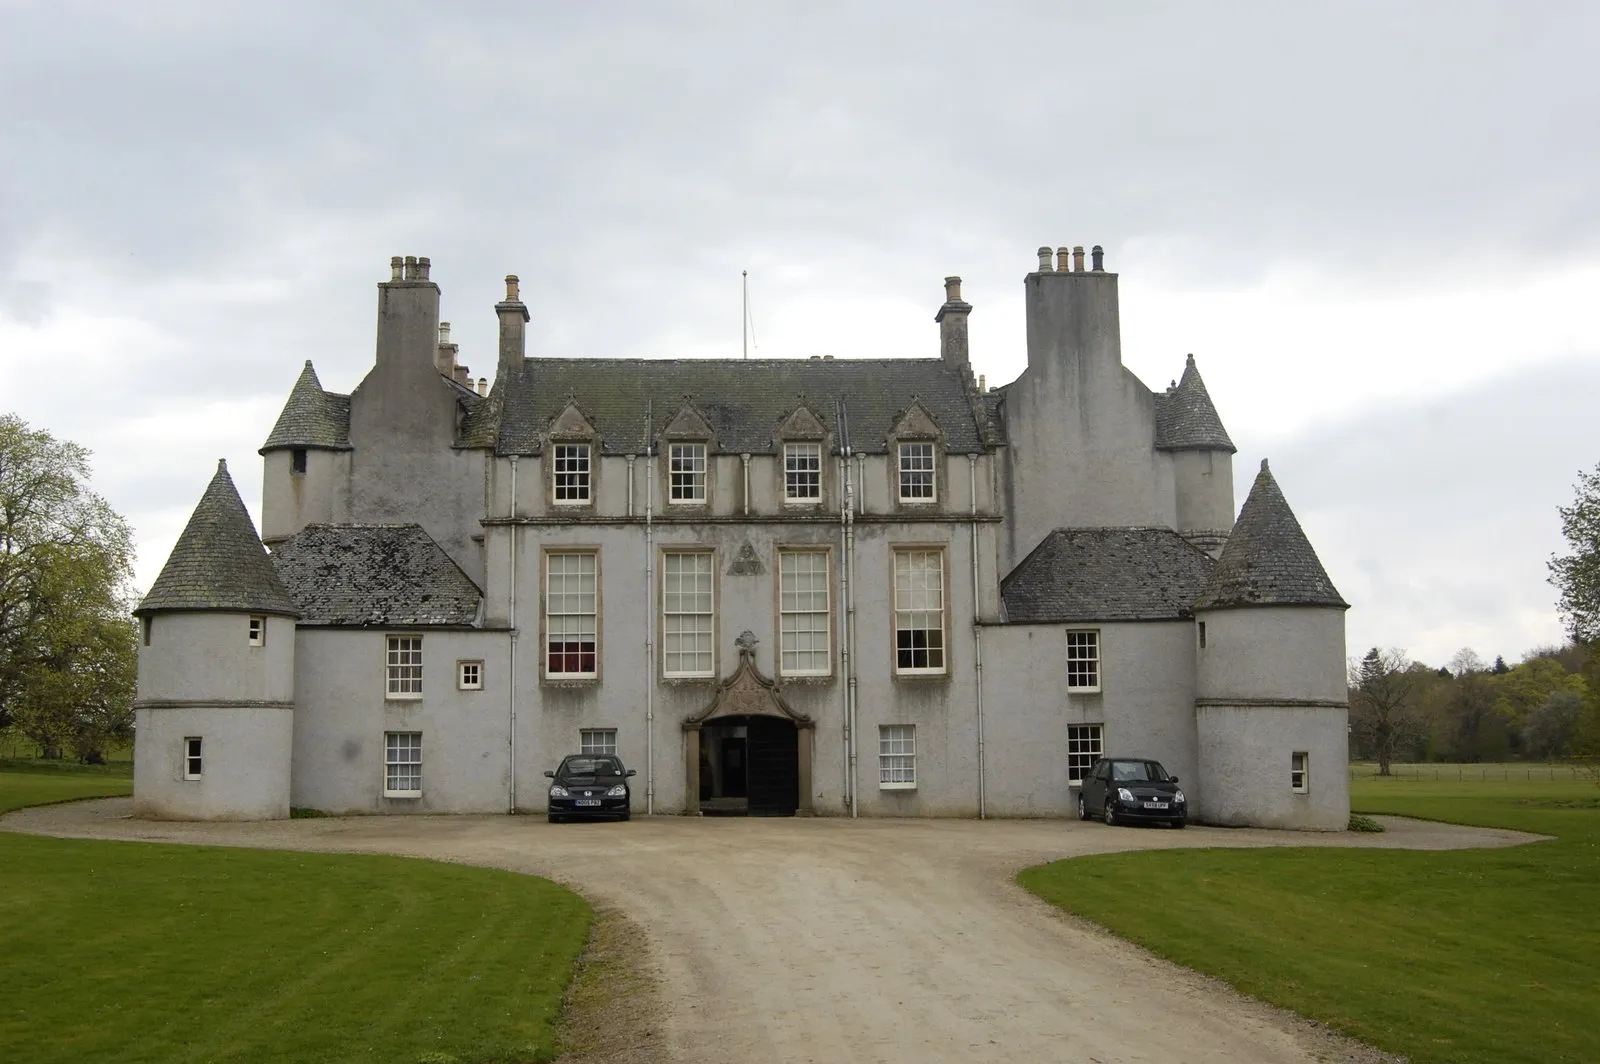 Photo showing: Leith Hall (rear elevation) For its history, see: http://www.undiscoveredscotland.co.uk/rhynie/leithhall/index.html